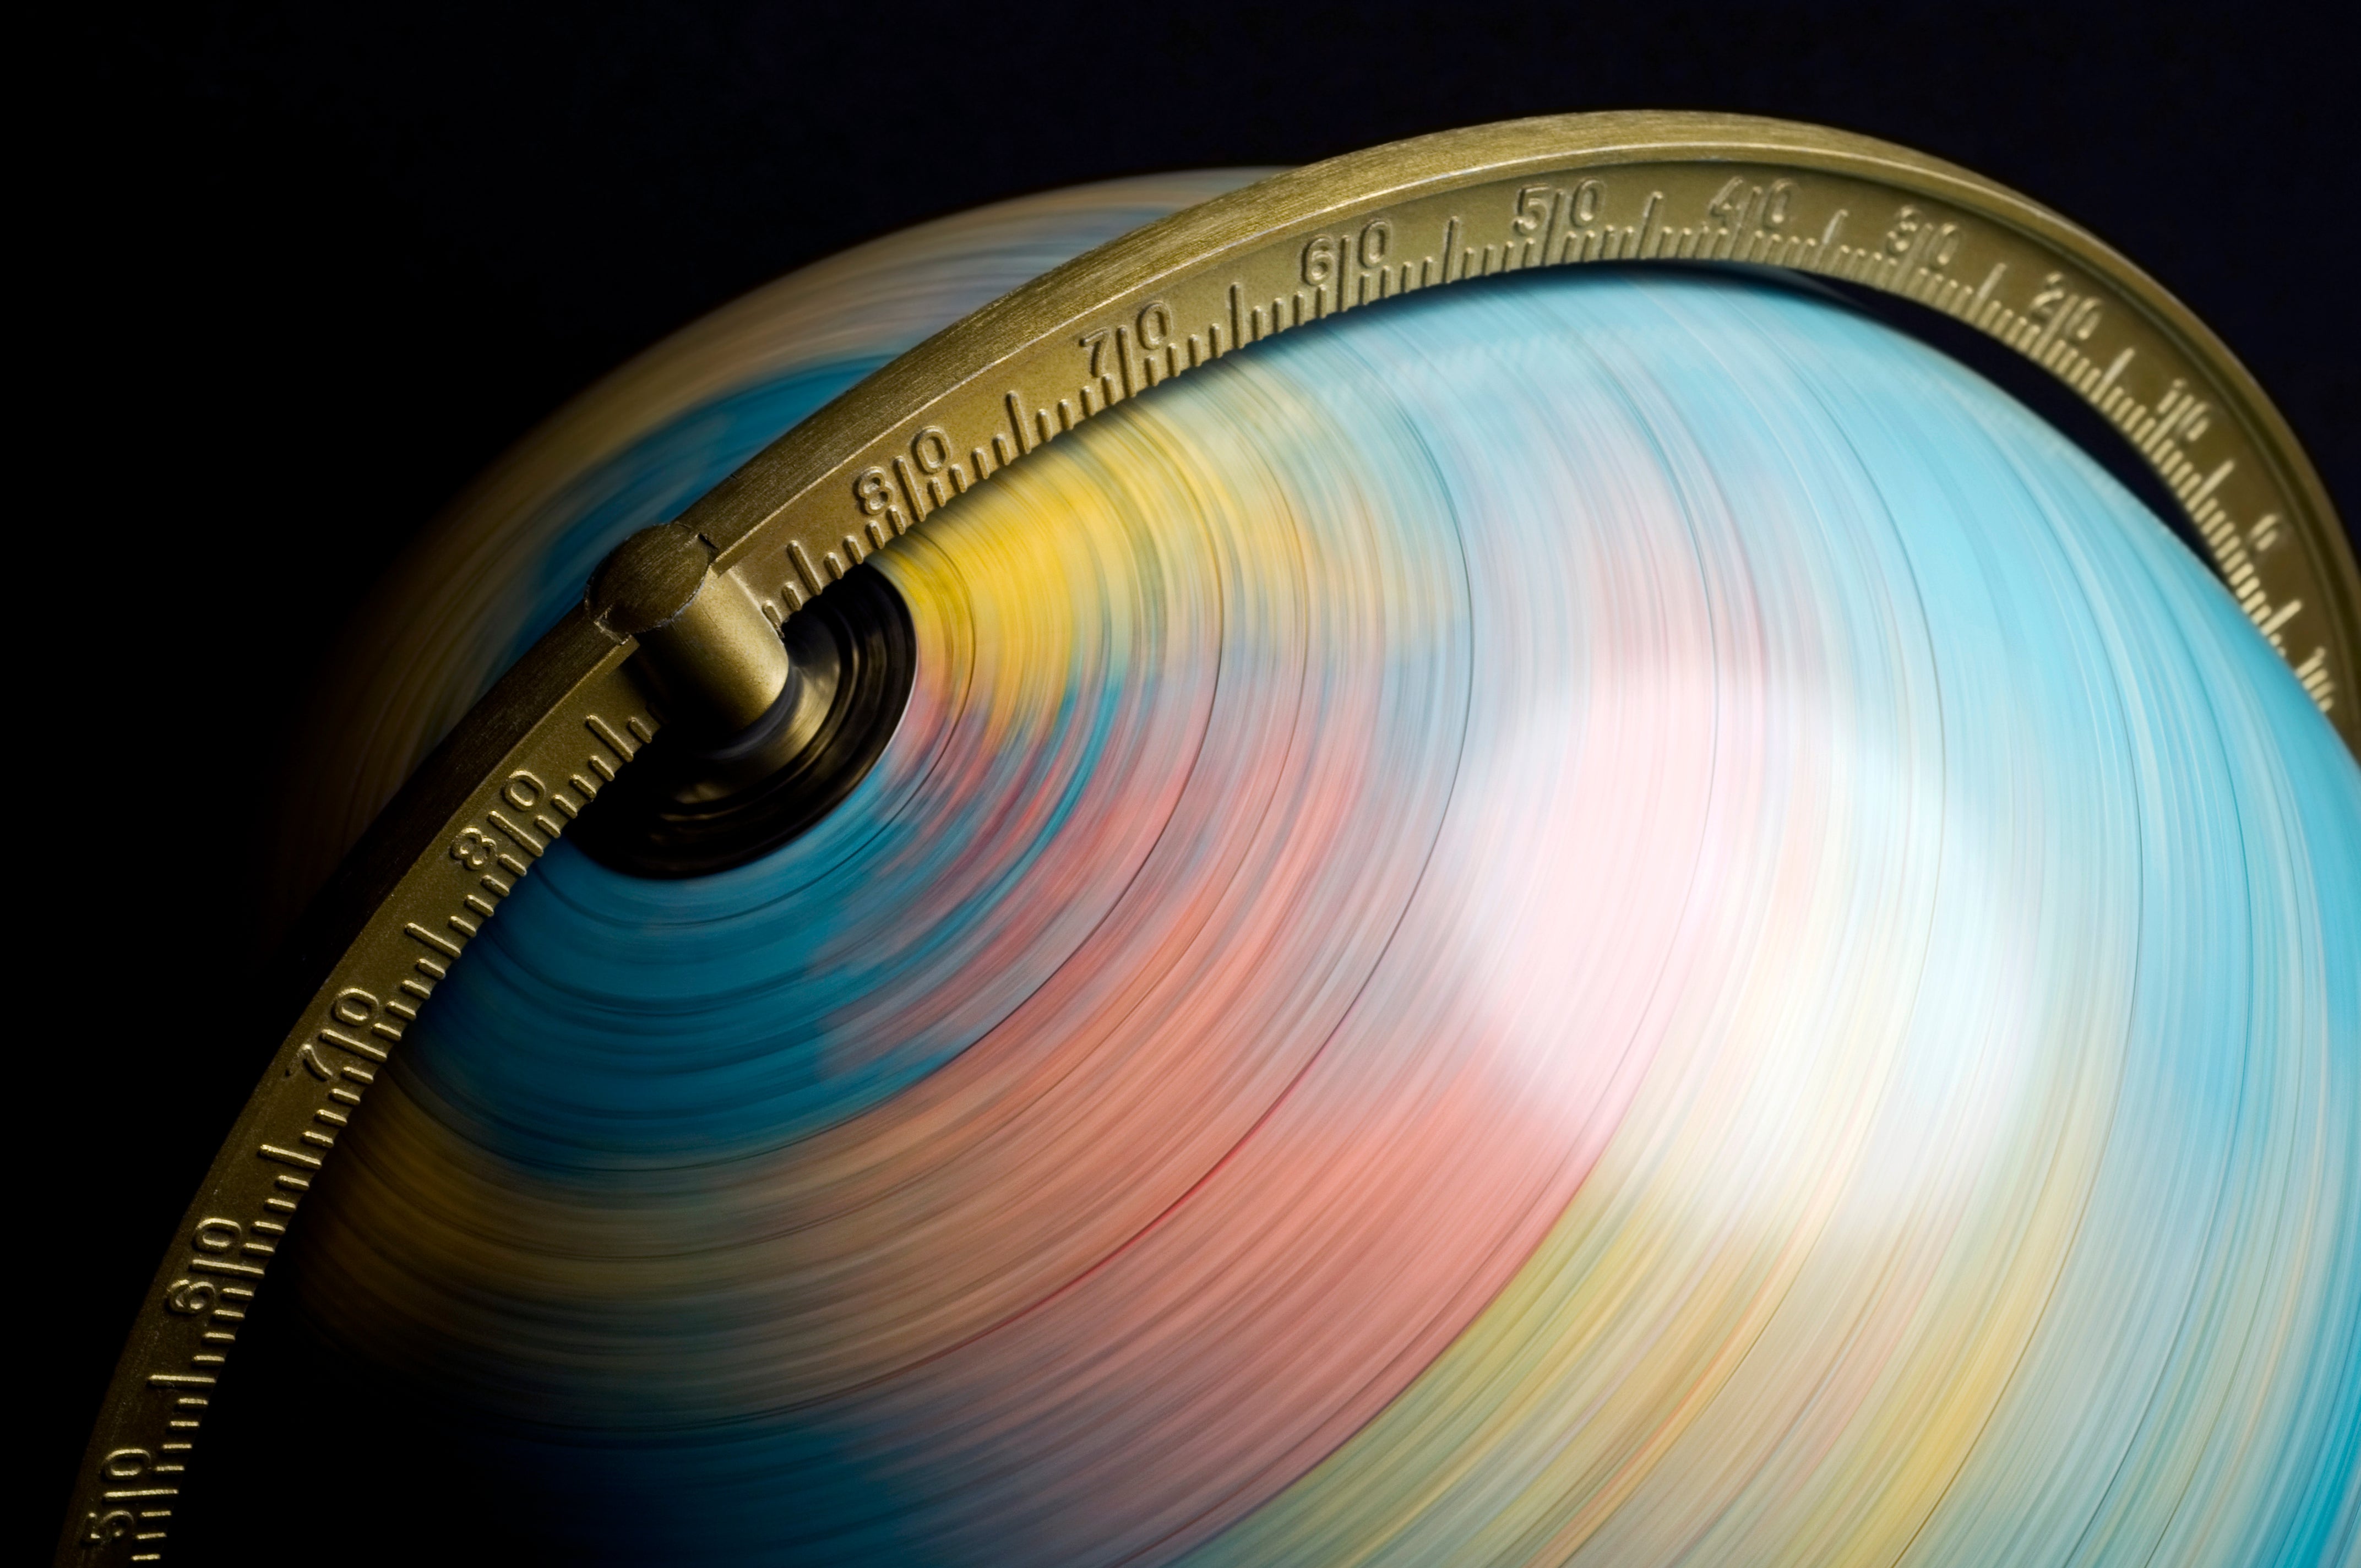 How fast is the earth moving? - Scientific American